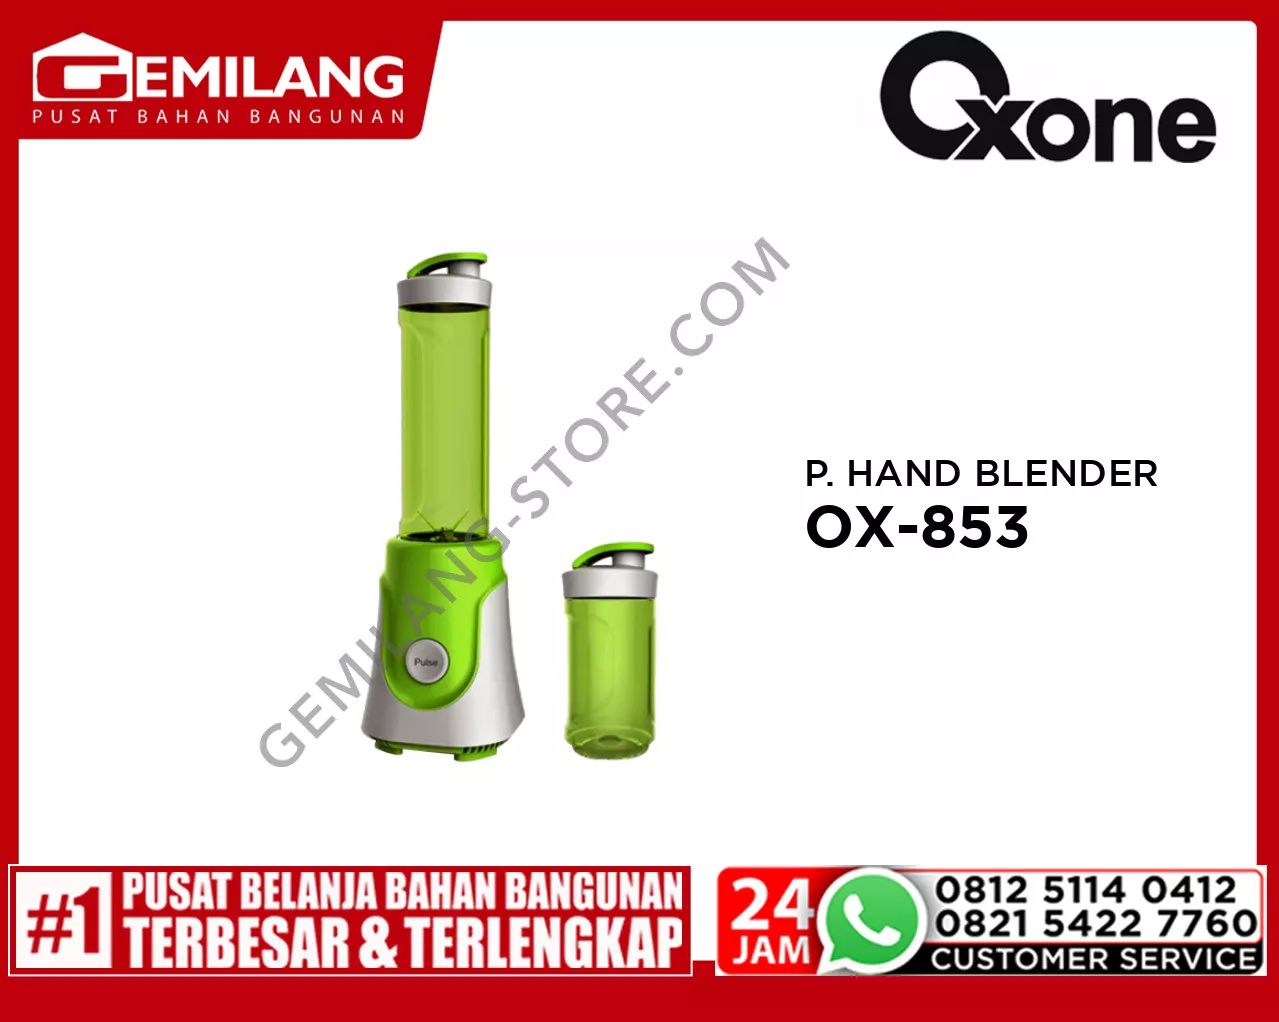 OXONE PERSONAL HAND BLENDER OX-853